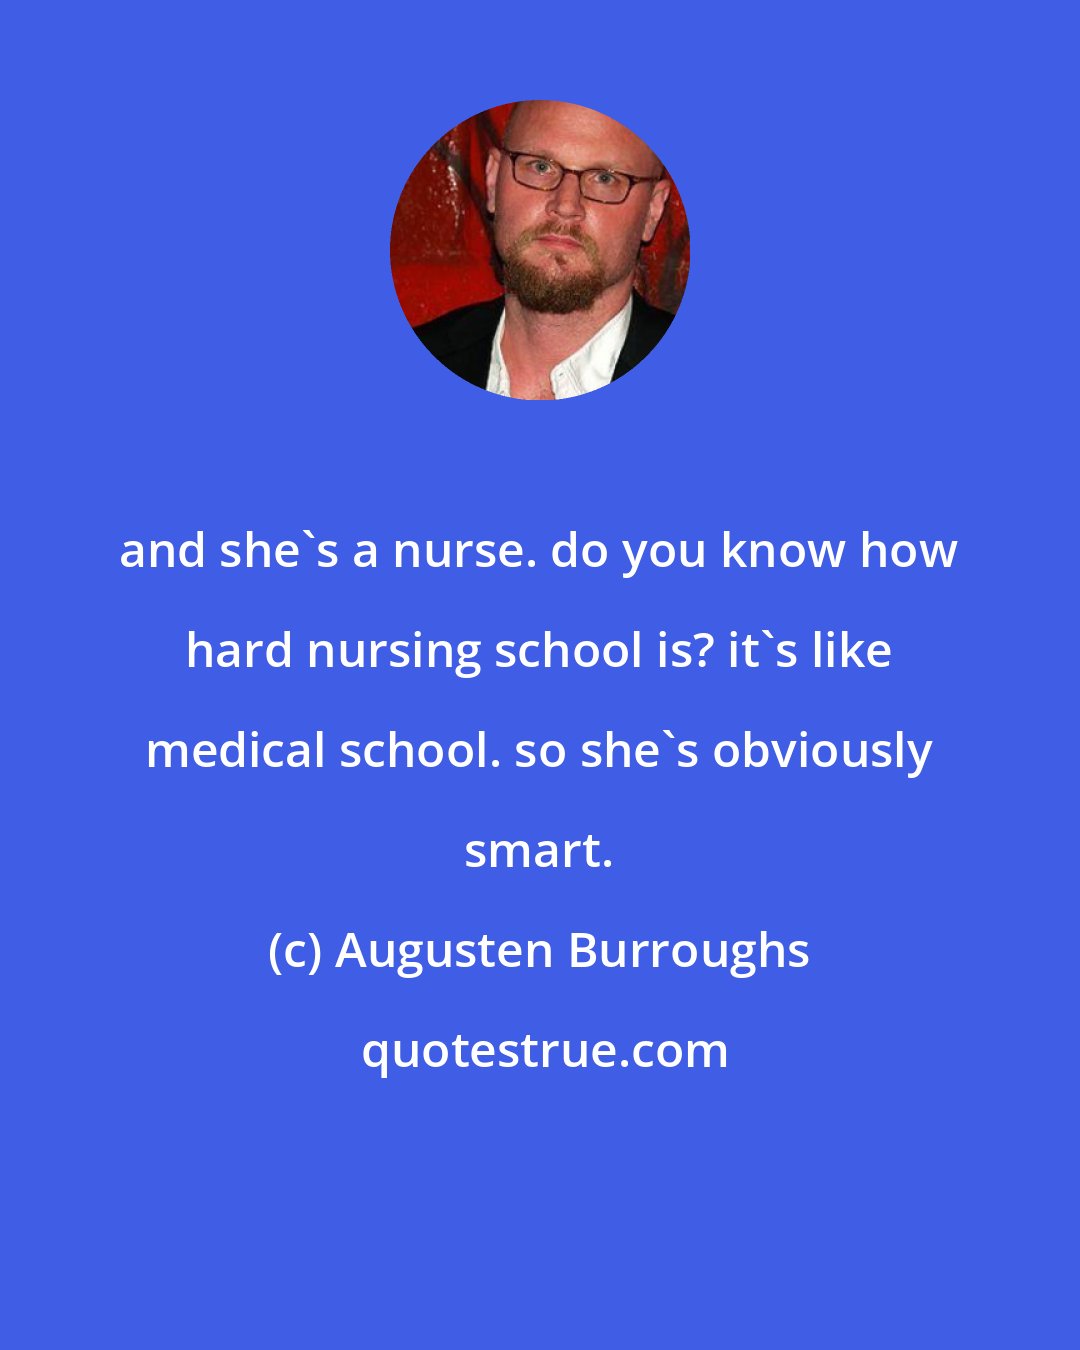 Augusten Burroughs: and she's a nurse. do you know how hard nursing school is? it's like medical school. so she's obviously smart.